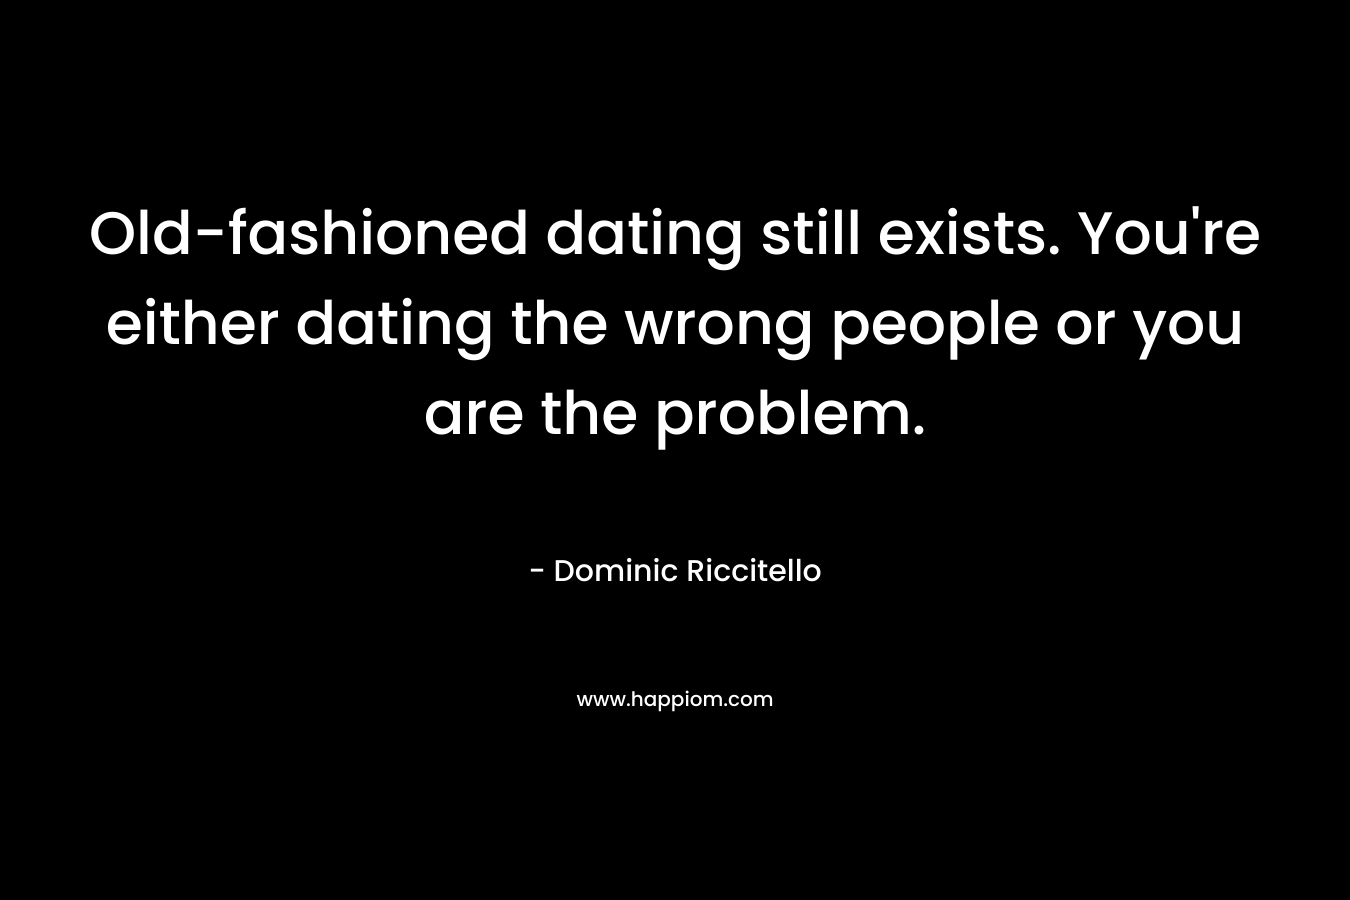 Old-fashioned dating still exists. You're either dating the wrong people or you are the problem.